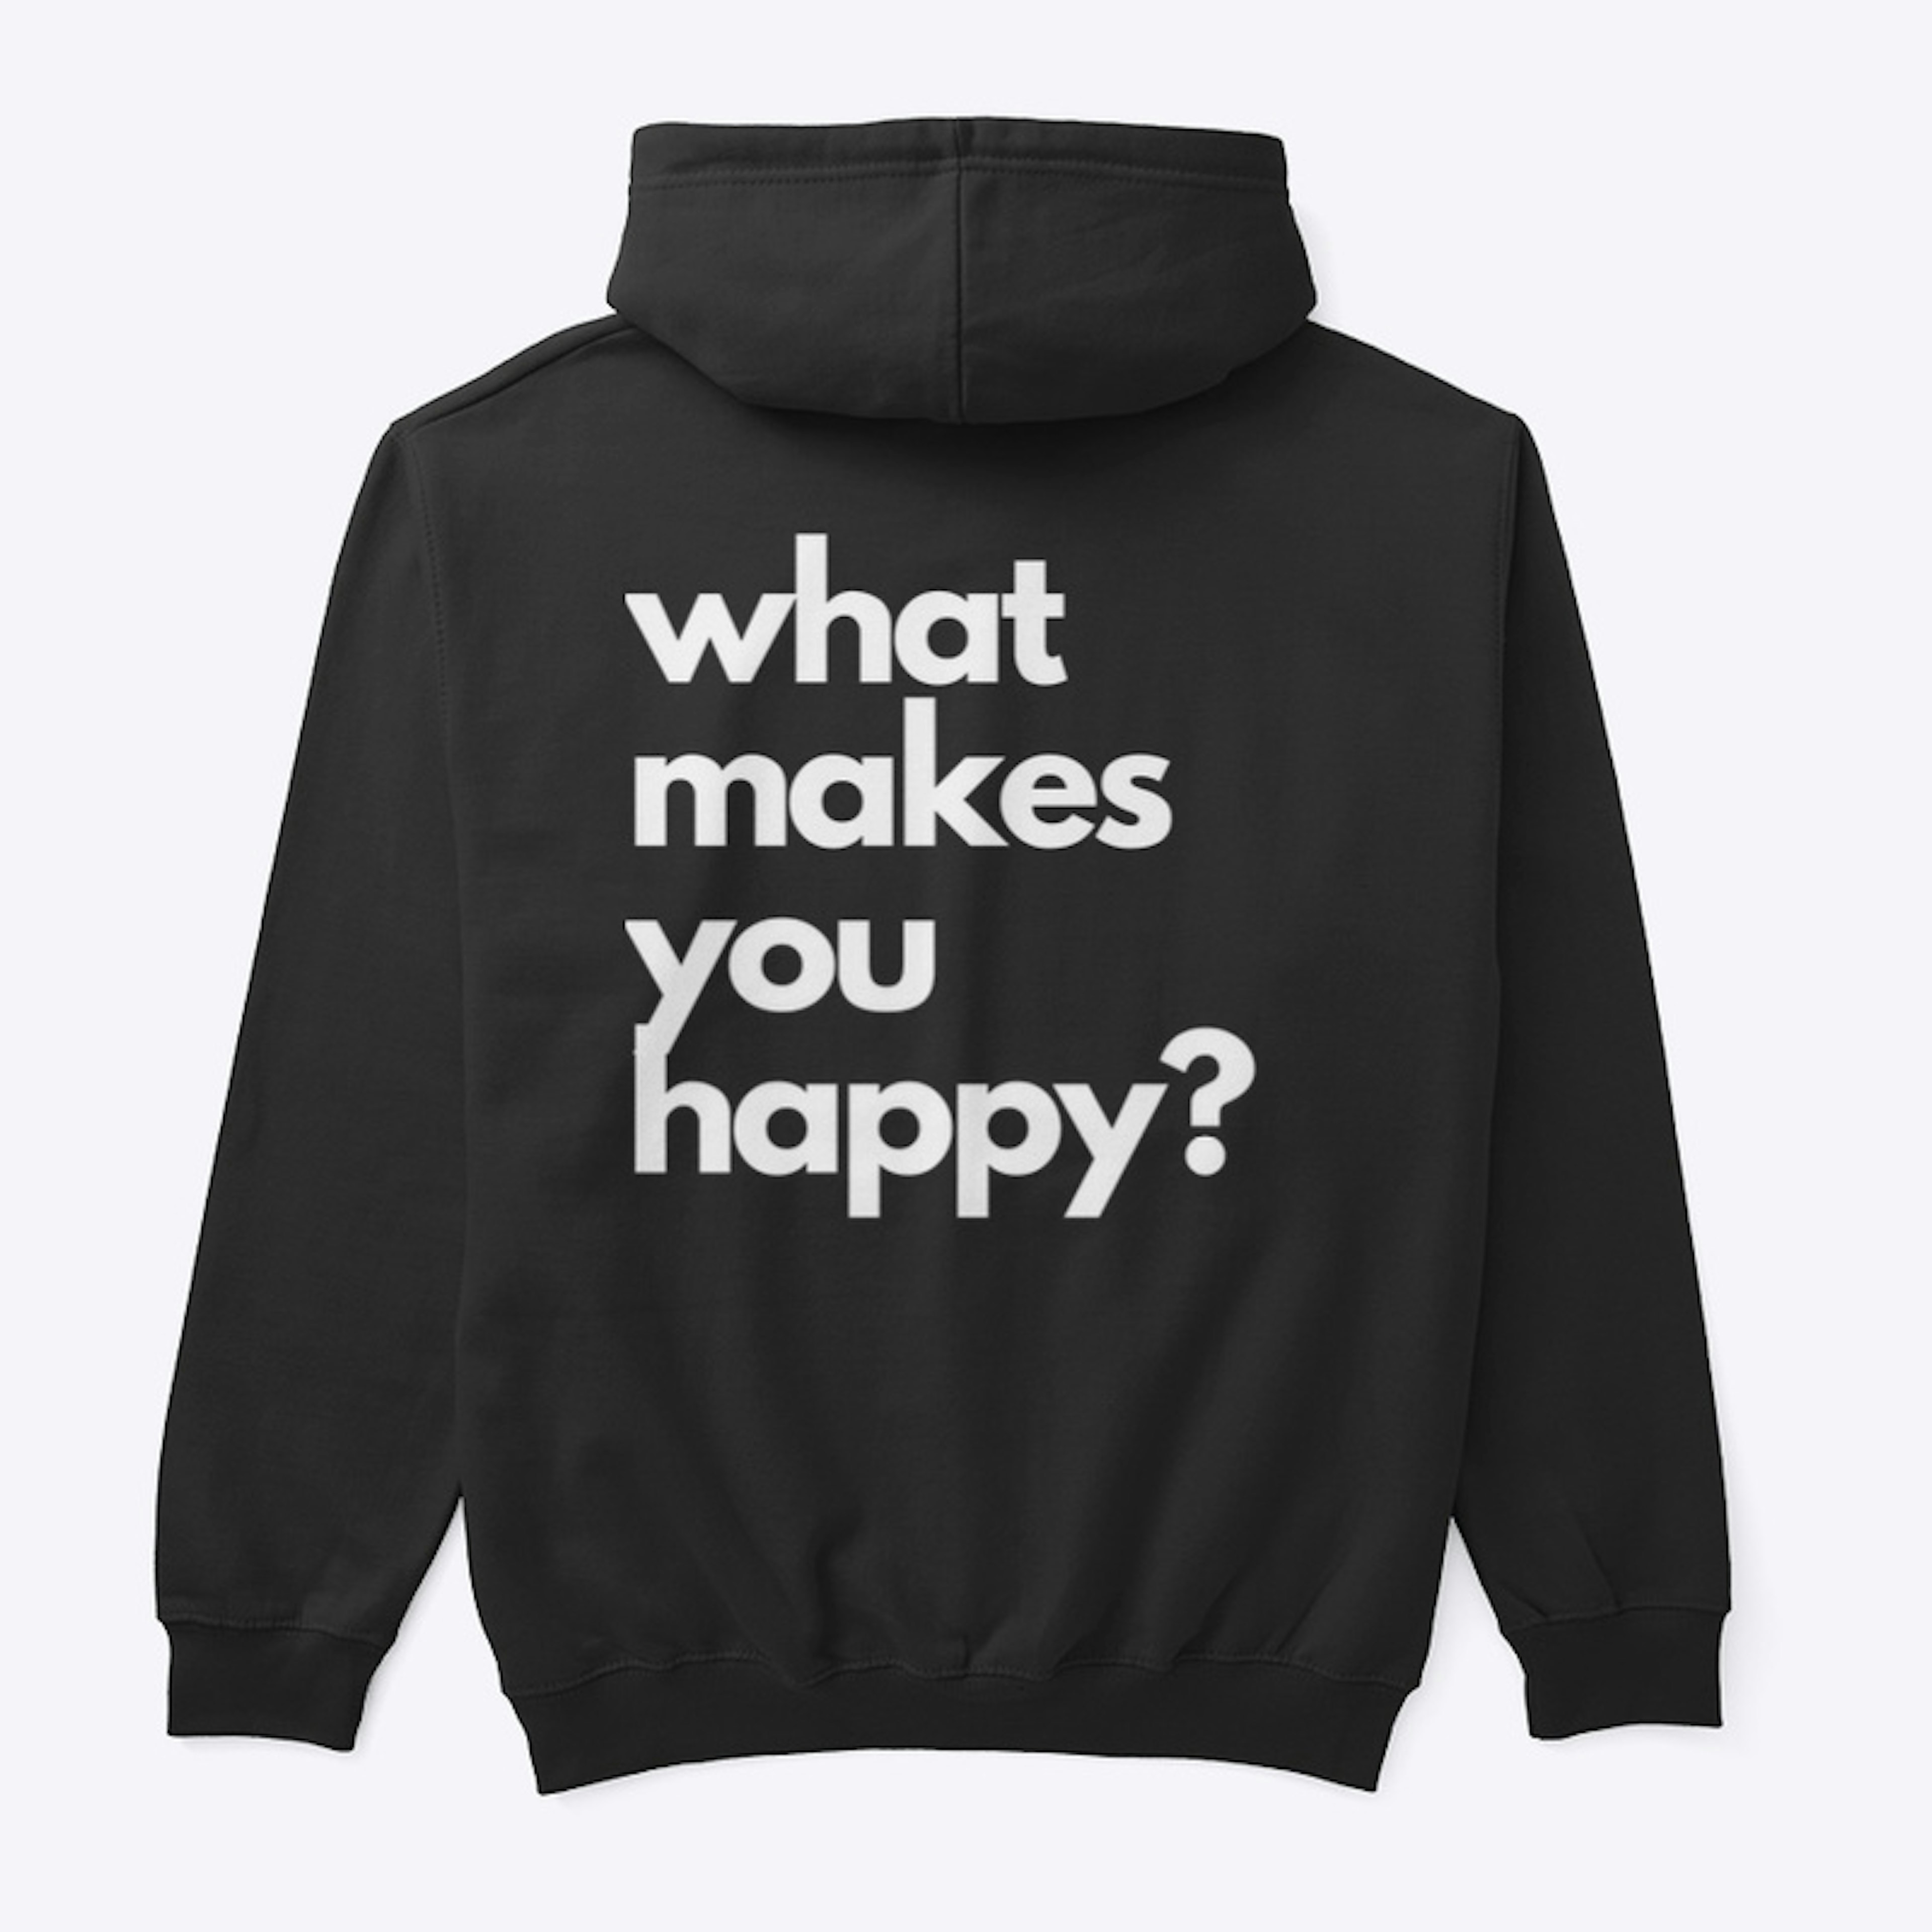 What makes you happy? 